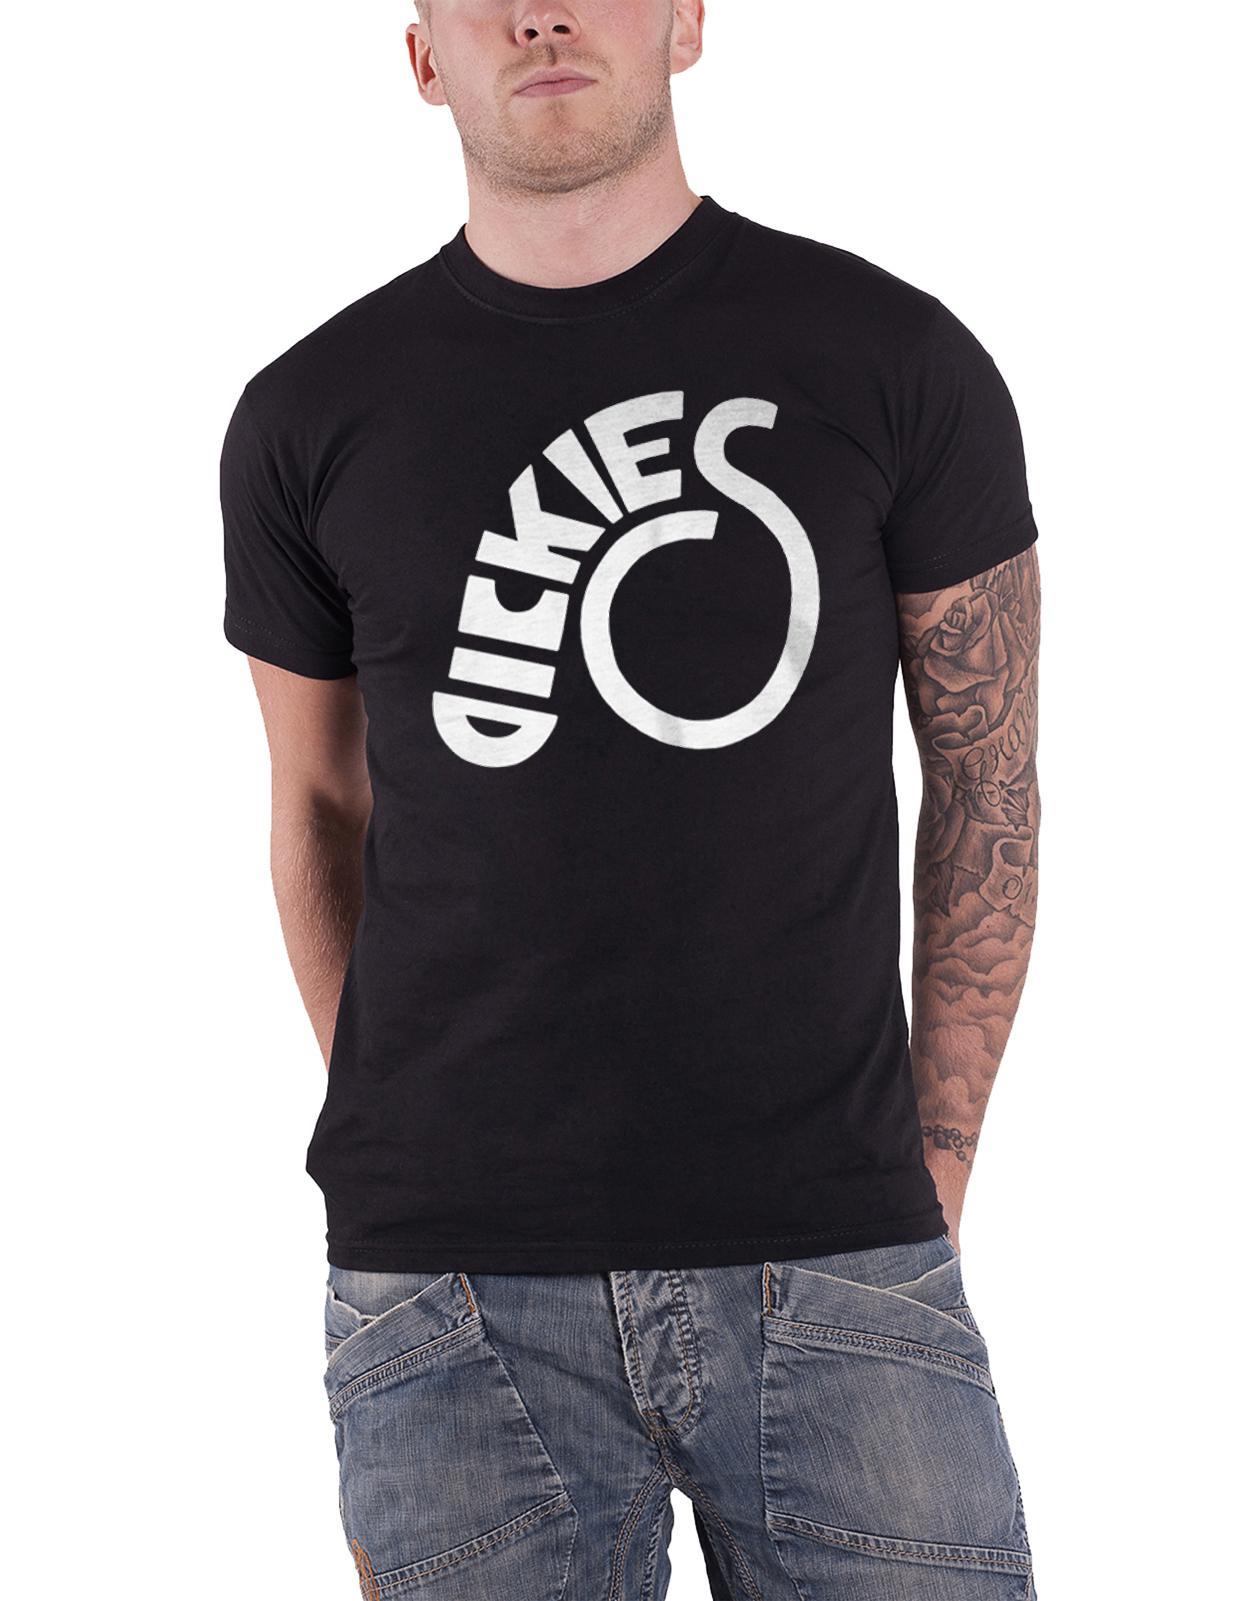 The Dickies T Shirt band Logo new Official Mens Black